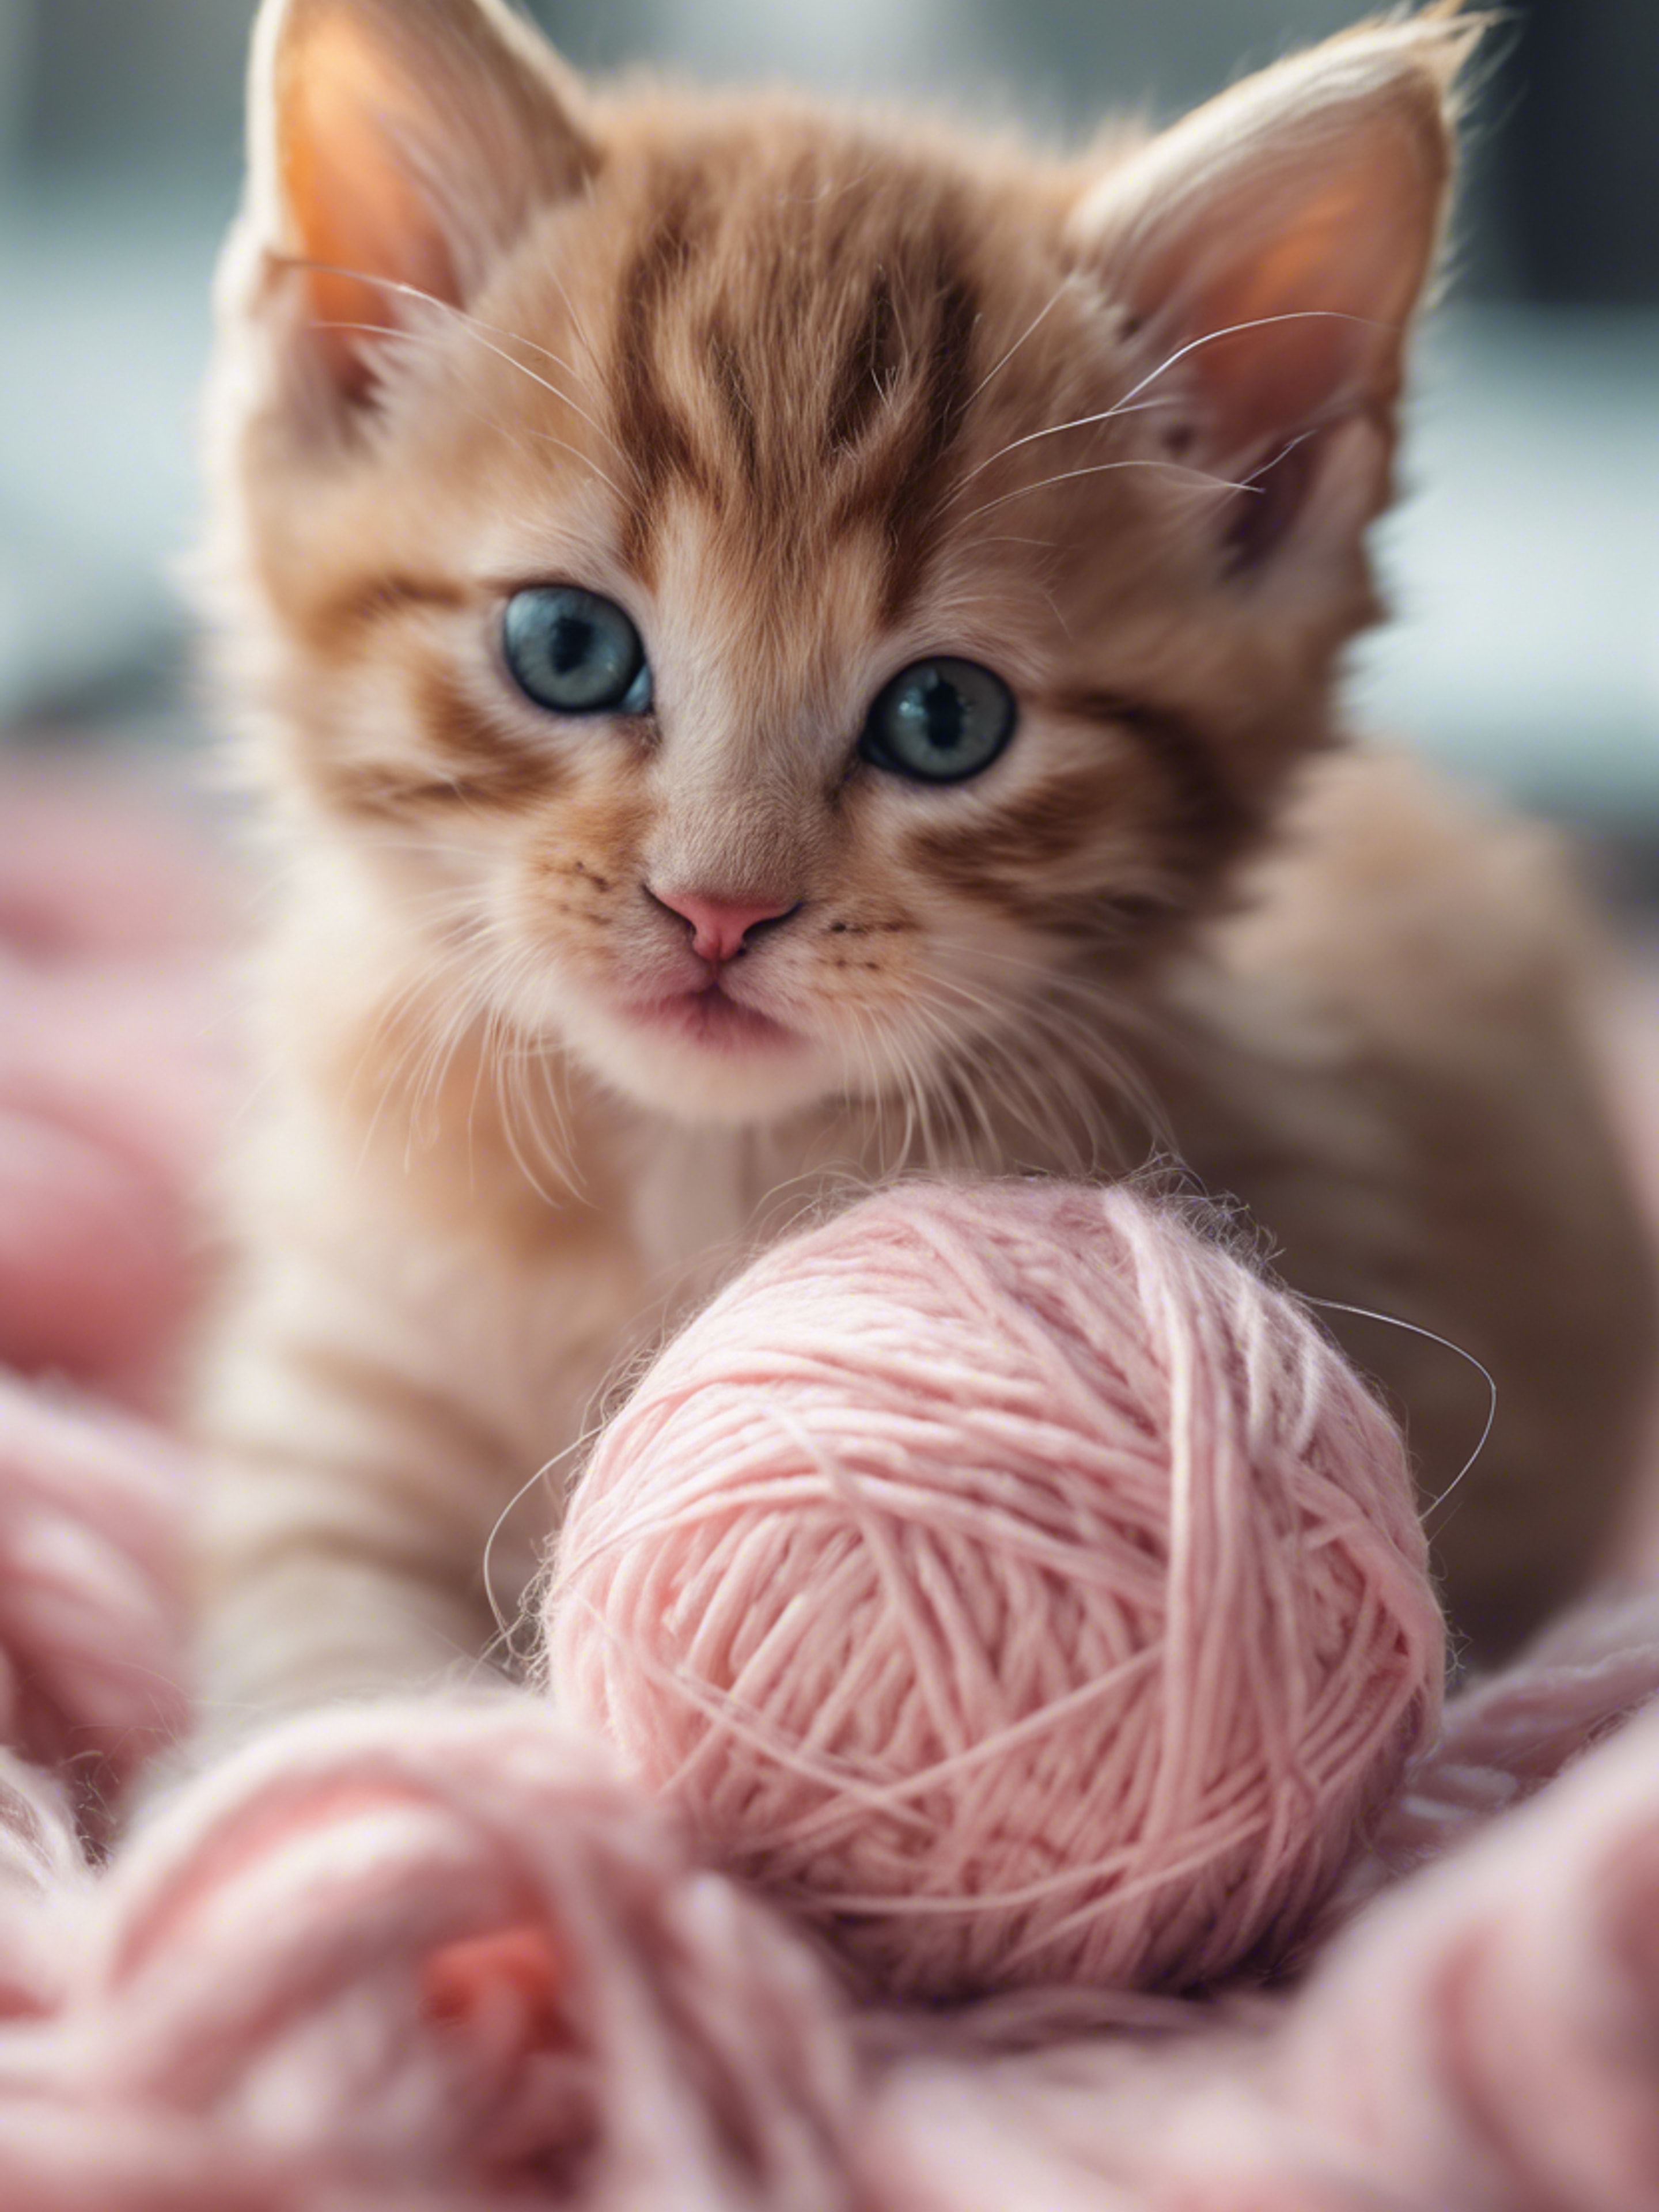 An adorable kitten with light pink fur playing with a ball of yarn. Wallpaper[dd75fe7383ed41cb9c9c]